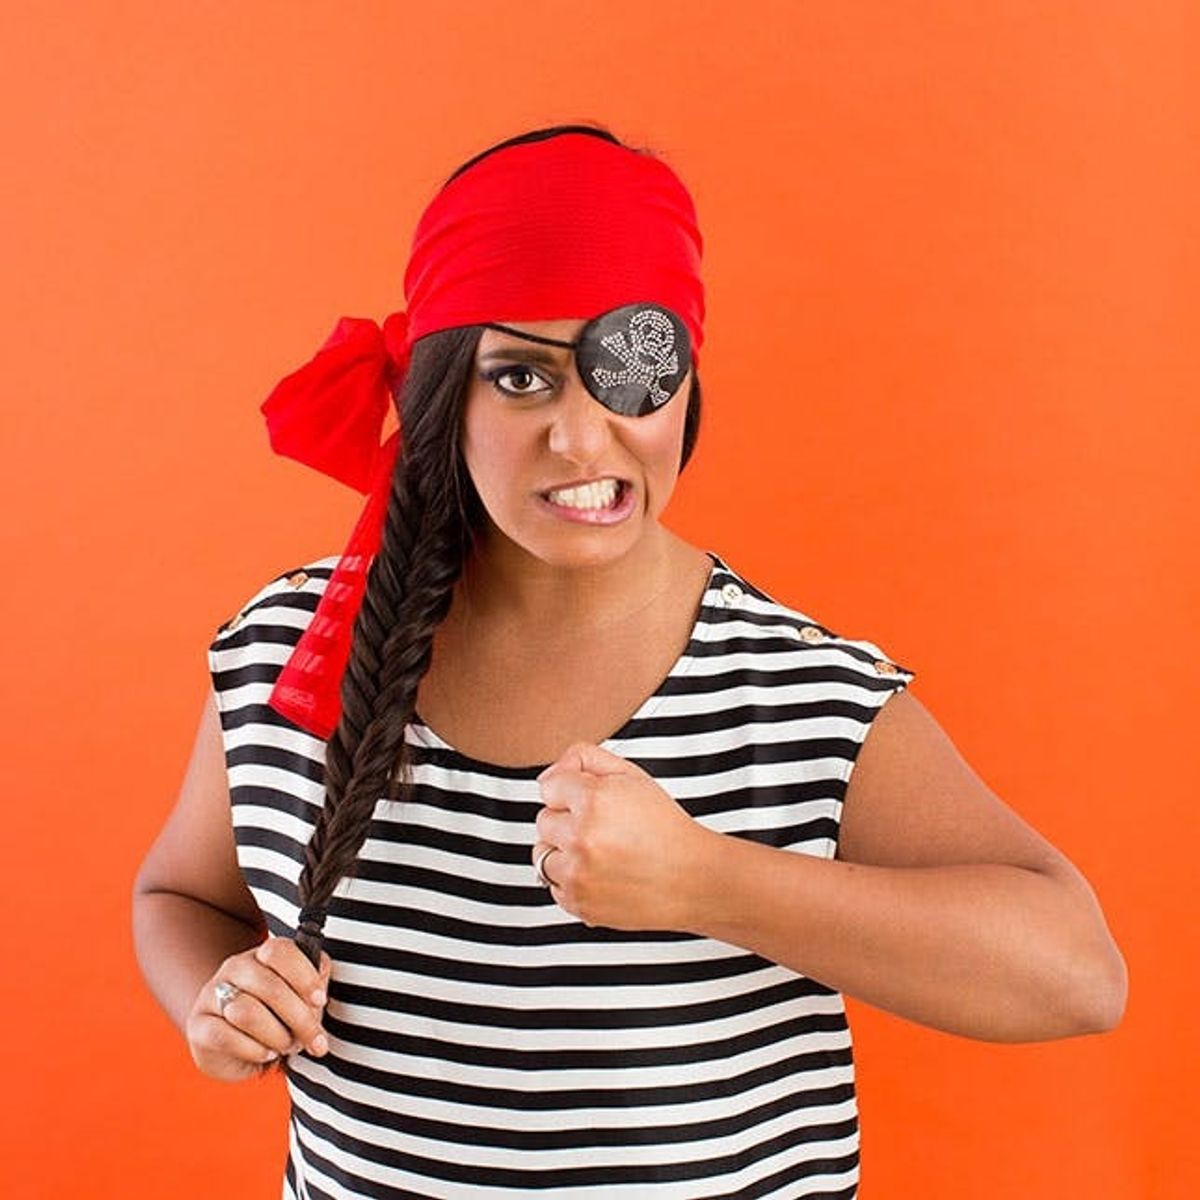 How to Make the Easiest Pirate Costume Ever